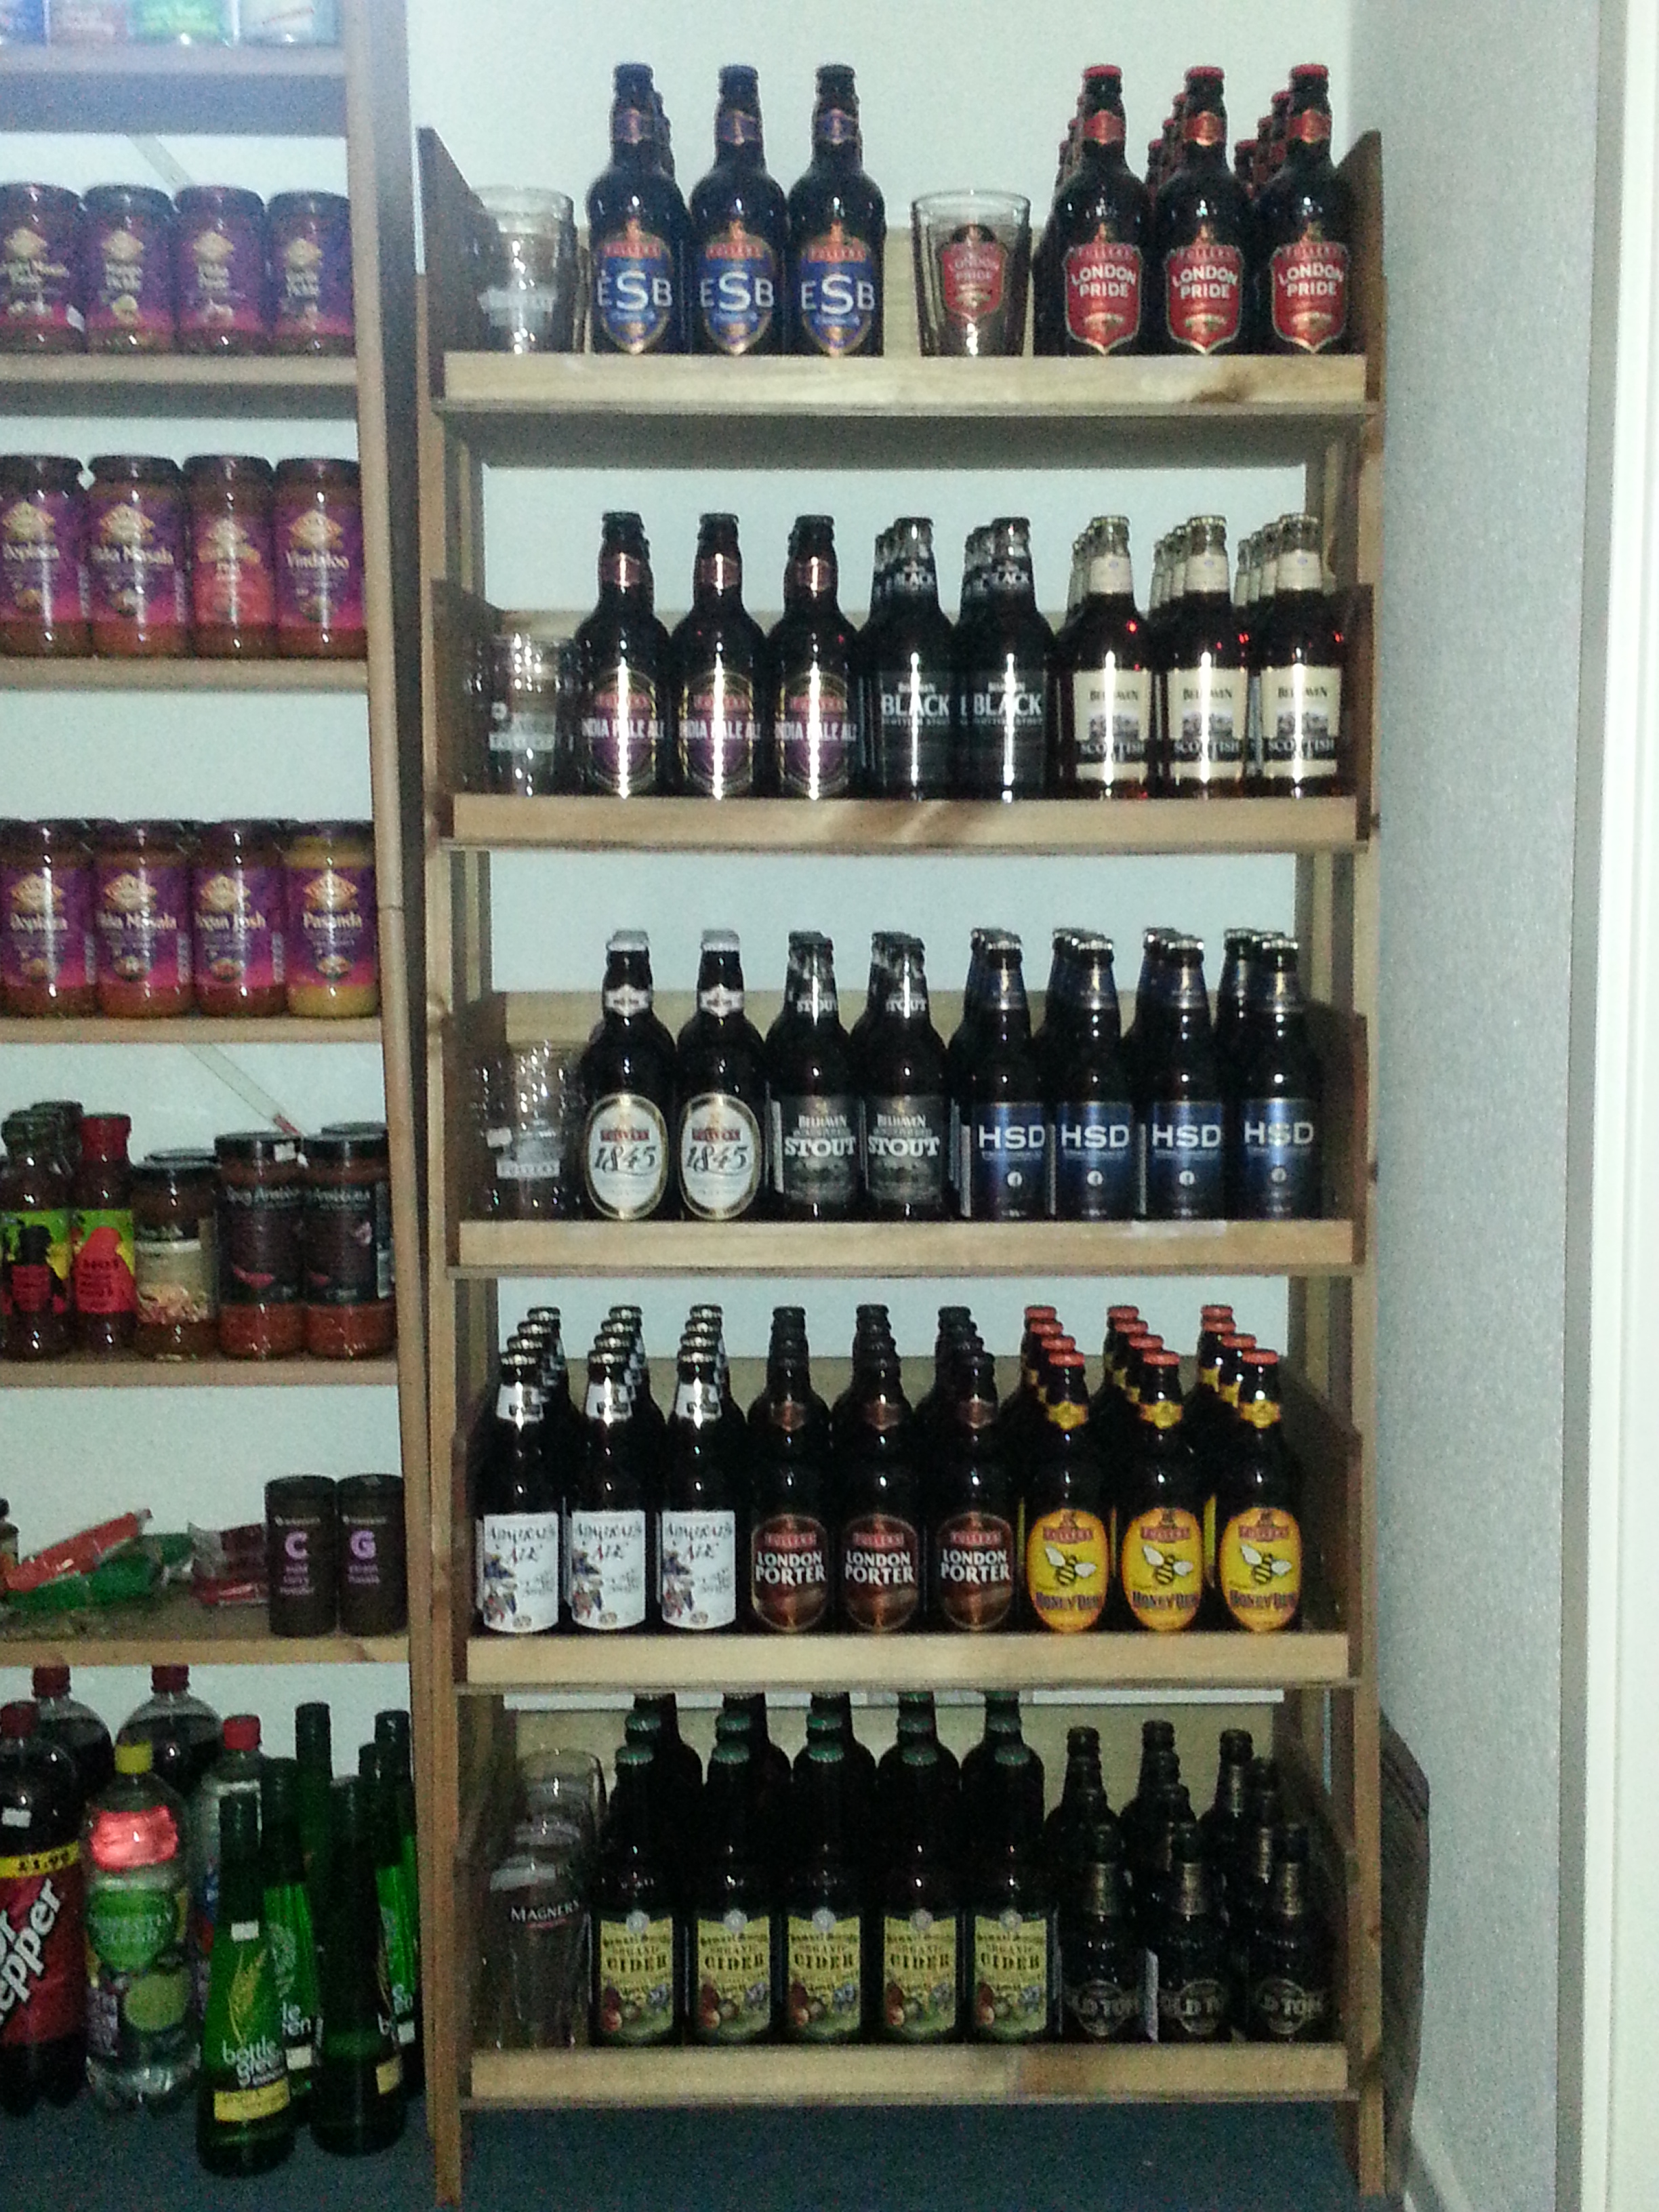 I stock a good range of Fullers beers and Cider and beer pint glasses